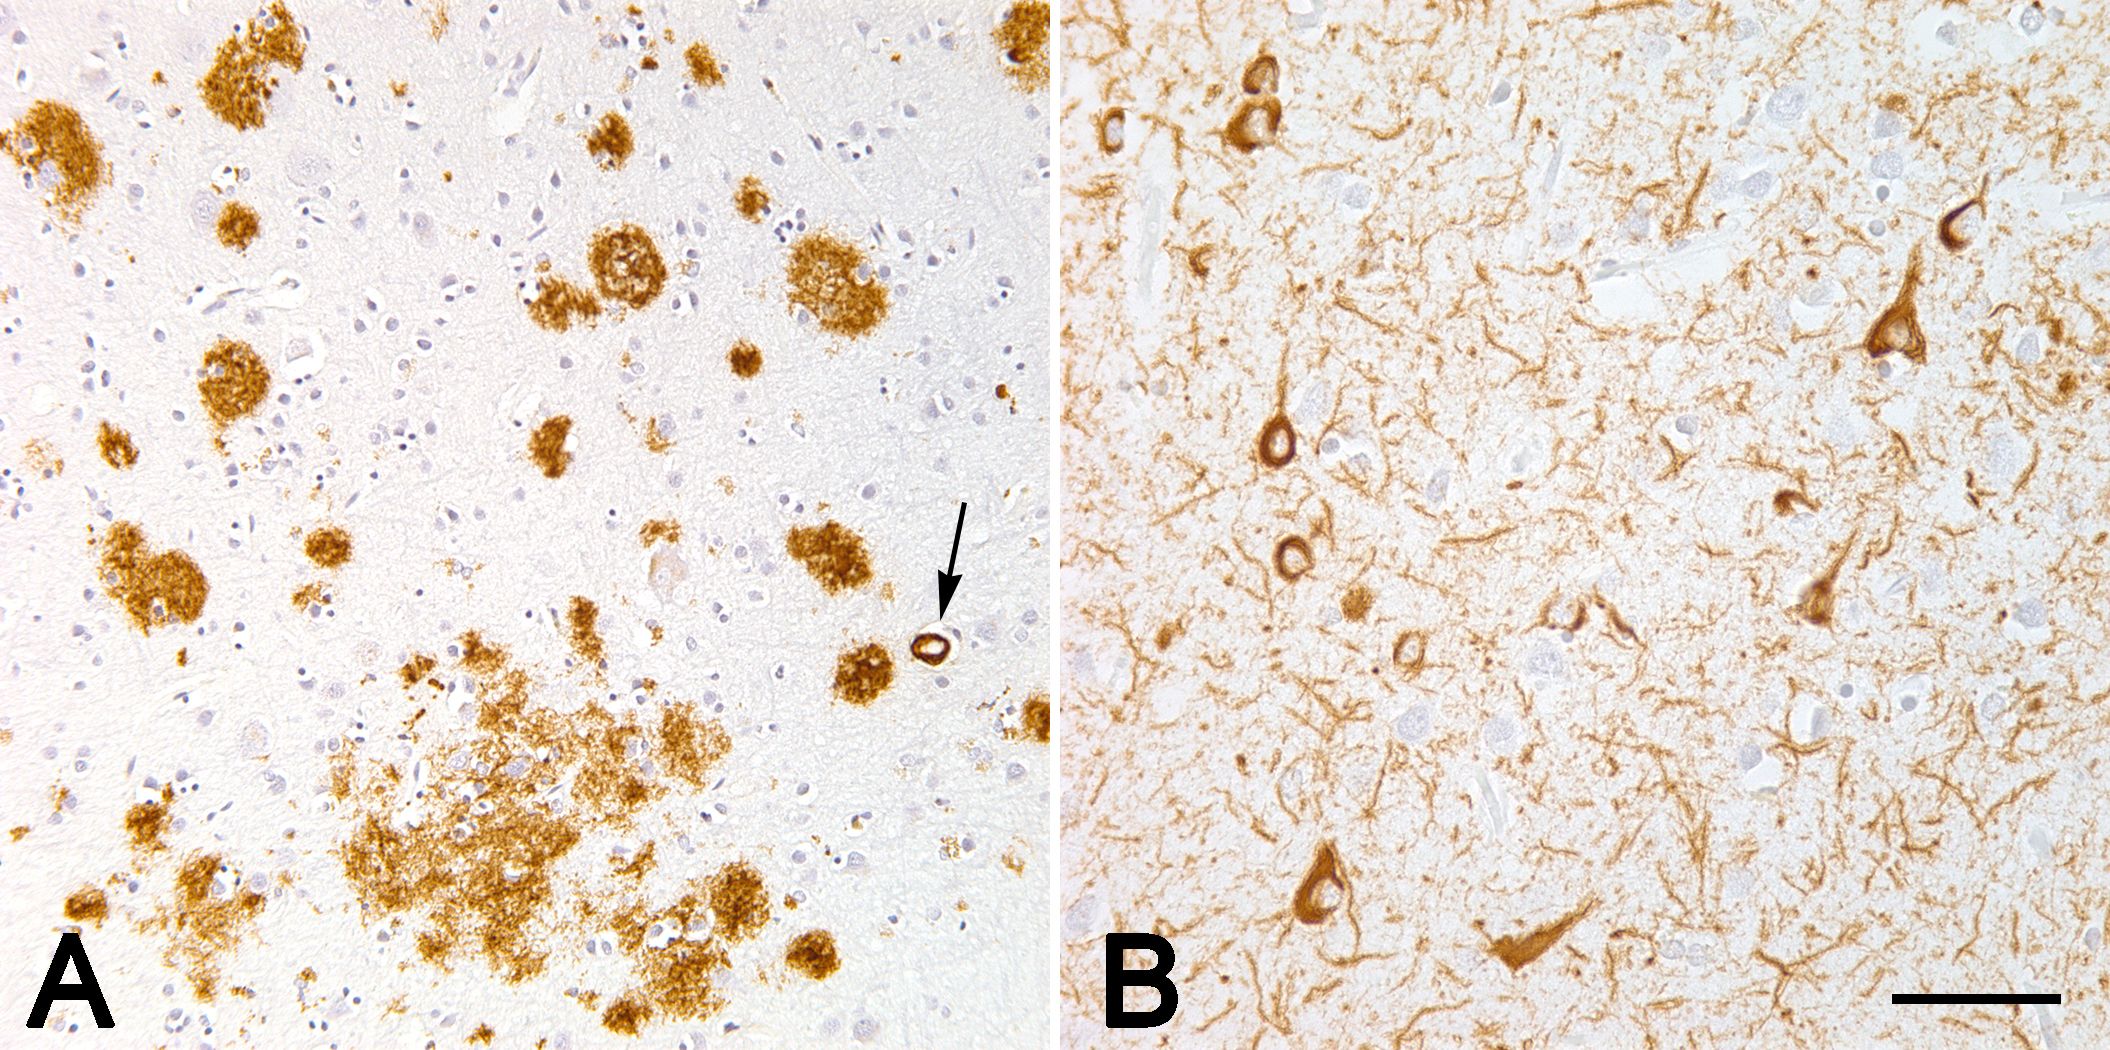 Aβ-proteopathy and tauopathy in the neocortex of an Alzheimer patient